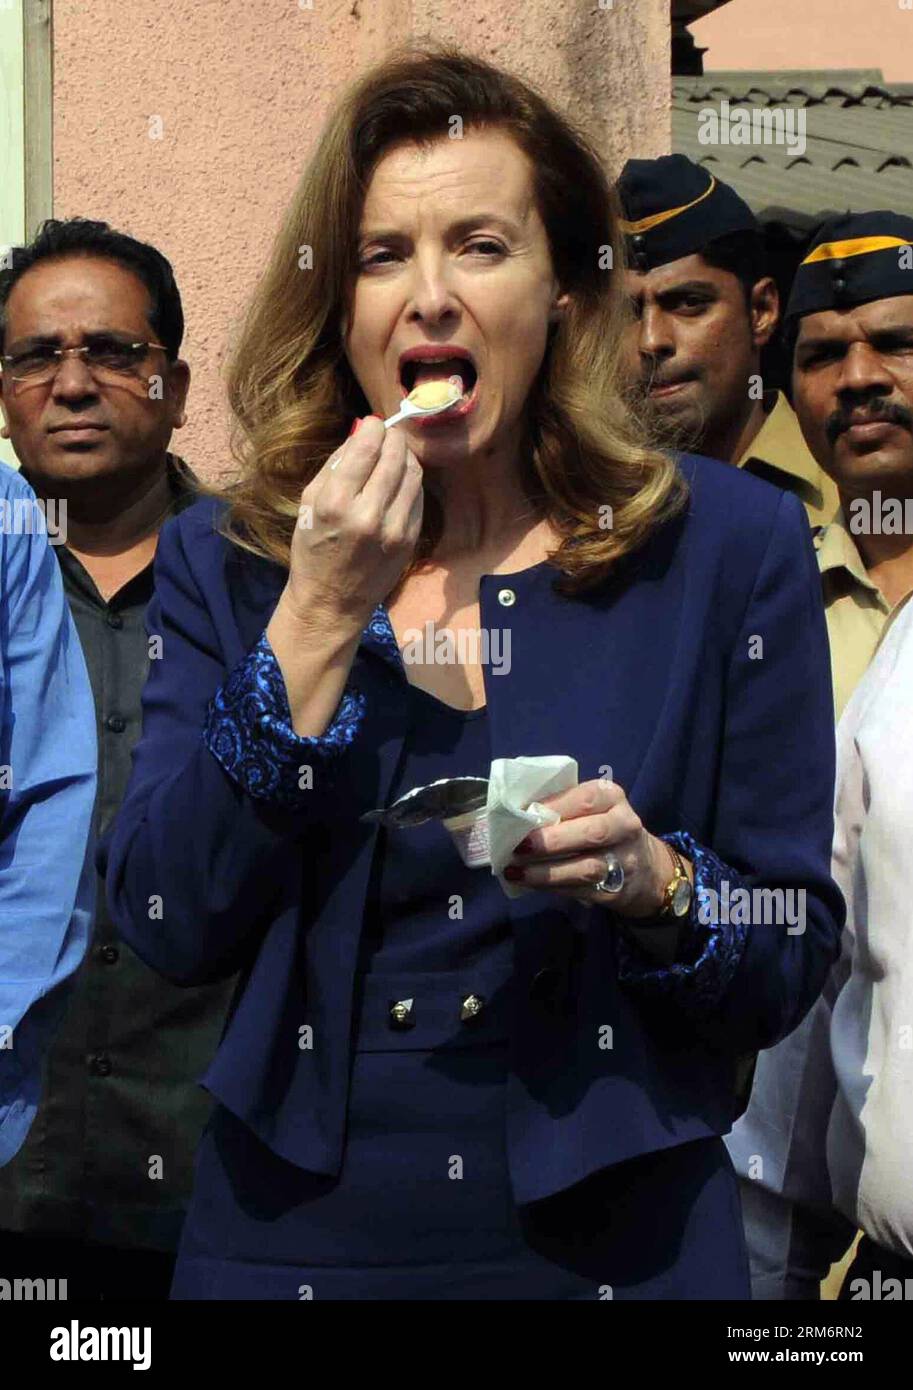 (140127) -- MUMBAI, Jan. 27, 2014 (Xinhua) -- Valerie Trierweiler (front), the ex-first lady of French President Francois Hollande, eats malnutrition formula at Nutrition Rehabilitation and Research Center at Dharavi slum in Mumbai, India, Jan. 27, 2014. A day after splitting up with Hollande, Trierweiler launched a new stage in her life Sunday with a charity visit to India. (Xinhua/Stringer) INDIA-MUMBAI-FRANCE-VALERIE TRIERWEILER PUBLICATIONxNOTxINxCHN   Mumbai Jan 27 2014 XINHUA Valerie Trierweiler Front The Ex First Lady of French President François Hollande eats malnutrition Formula AT Nu Stock Photo